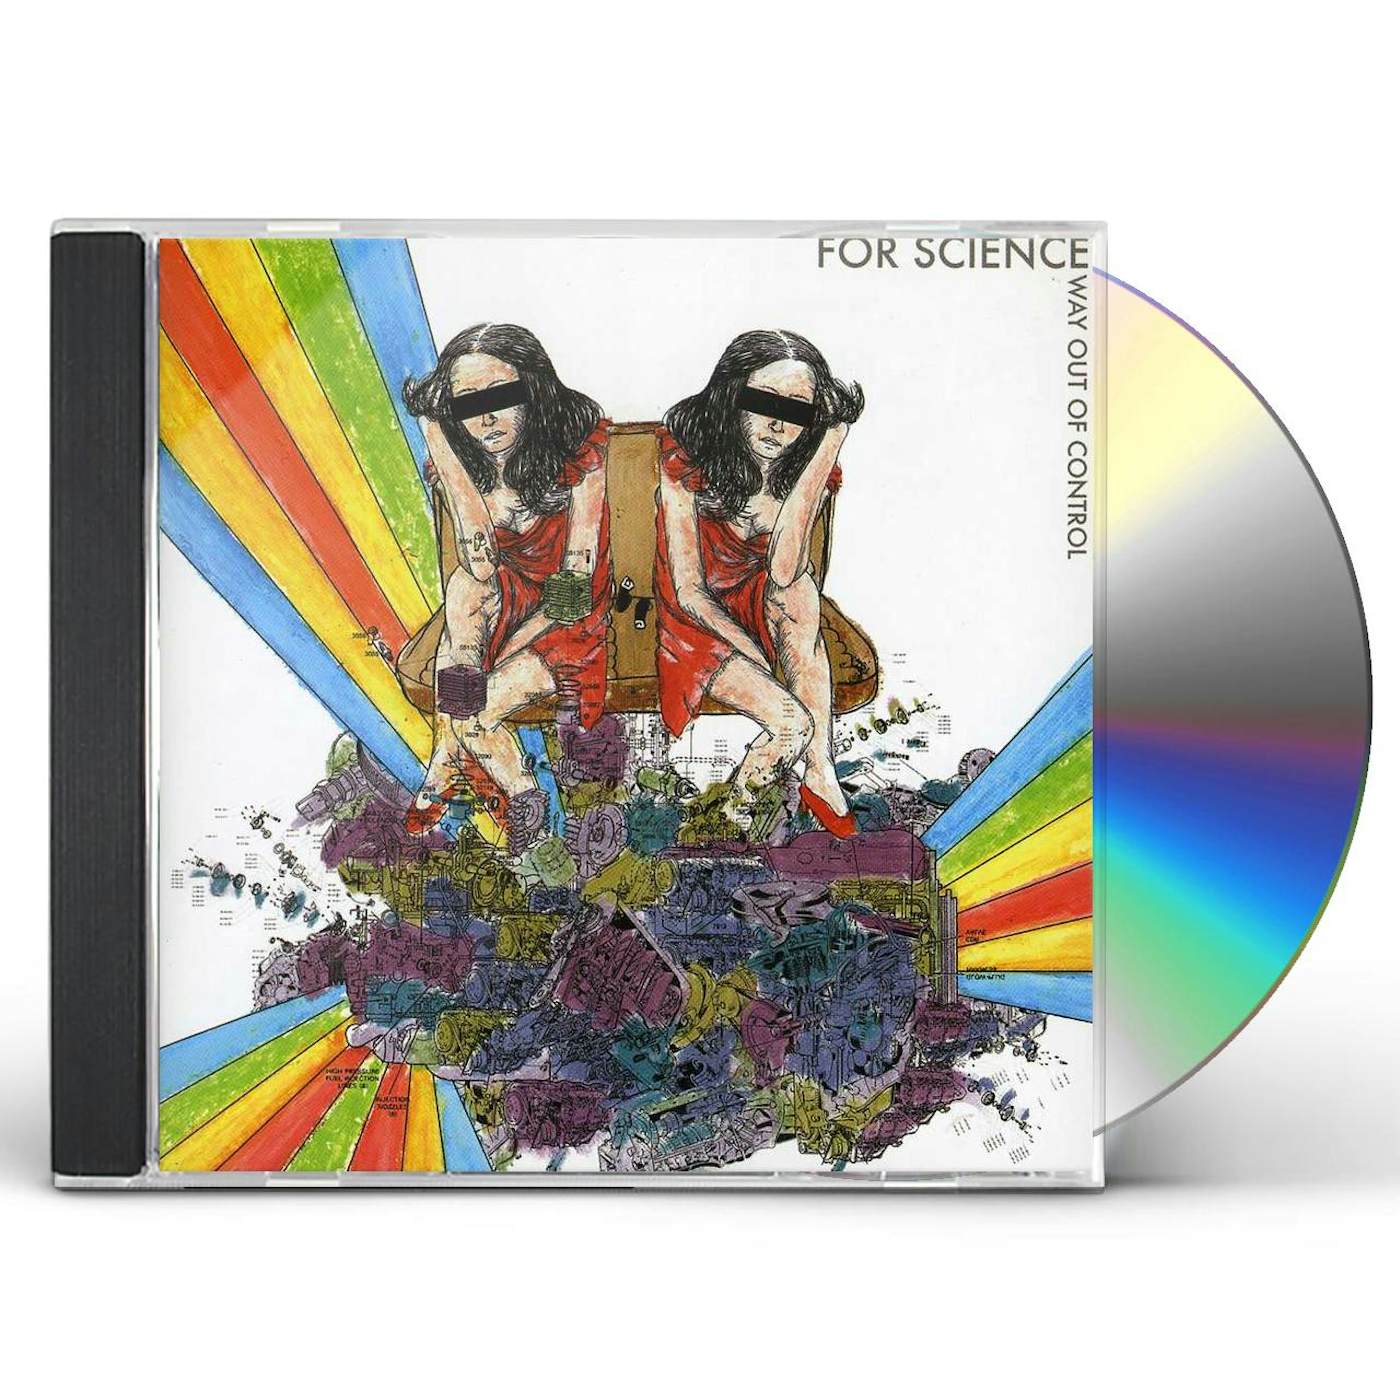 For Science WAY OUT OF CONTROL CD